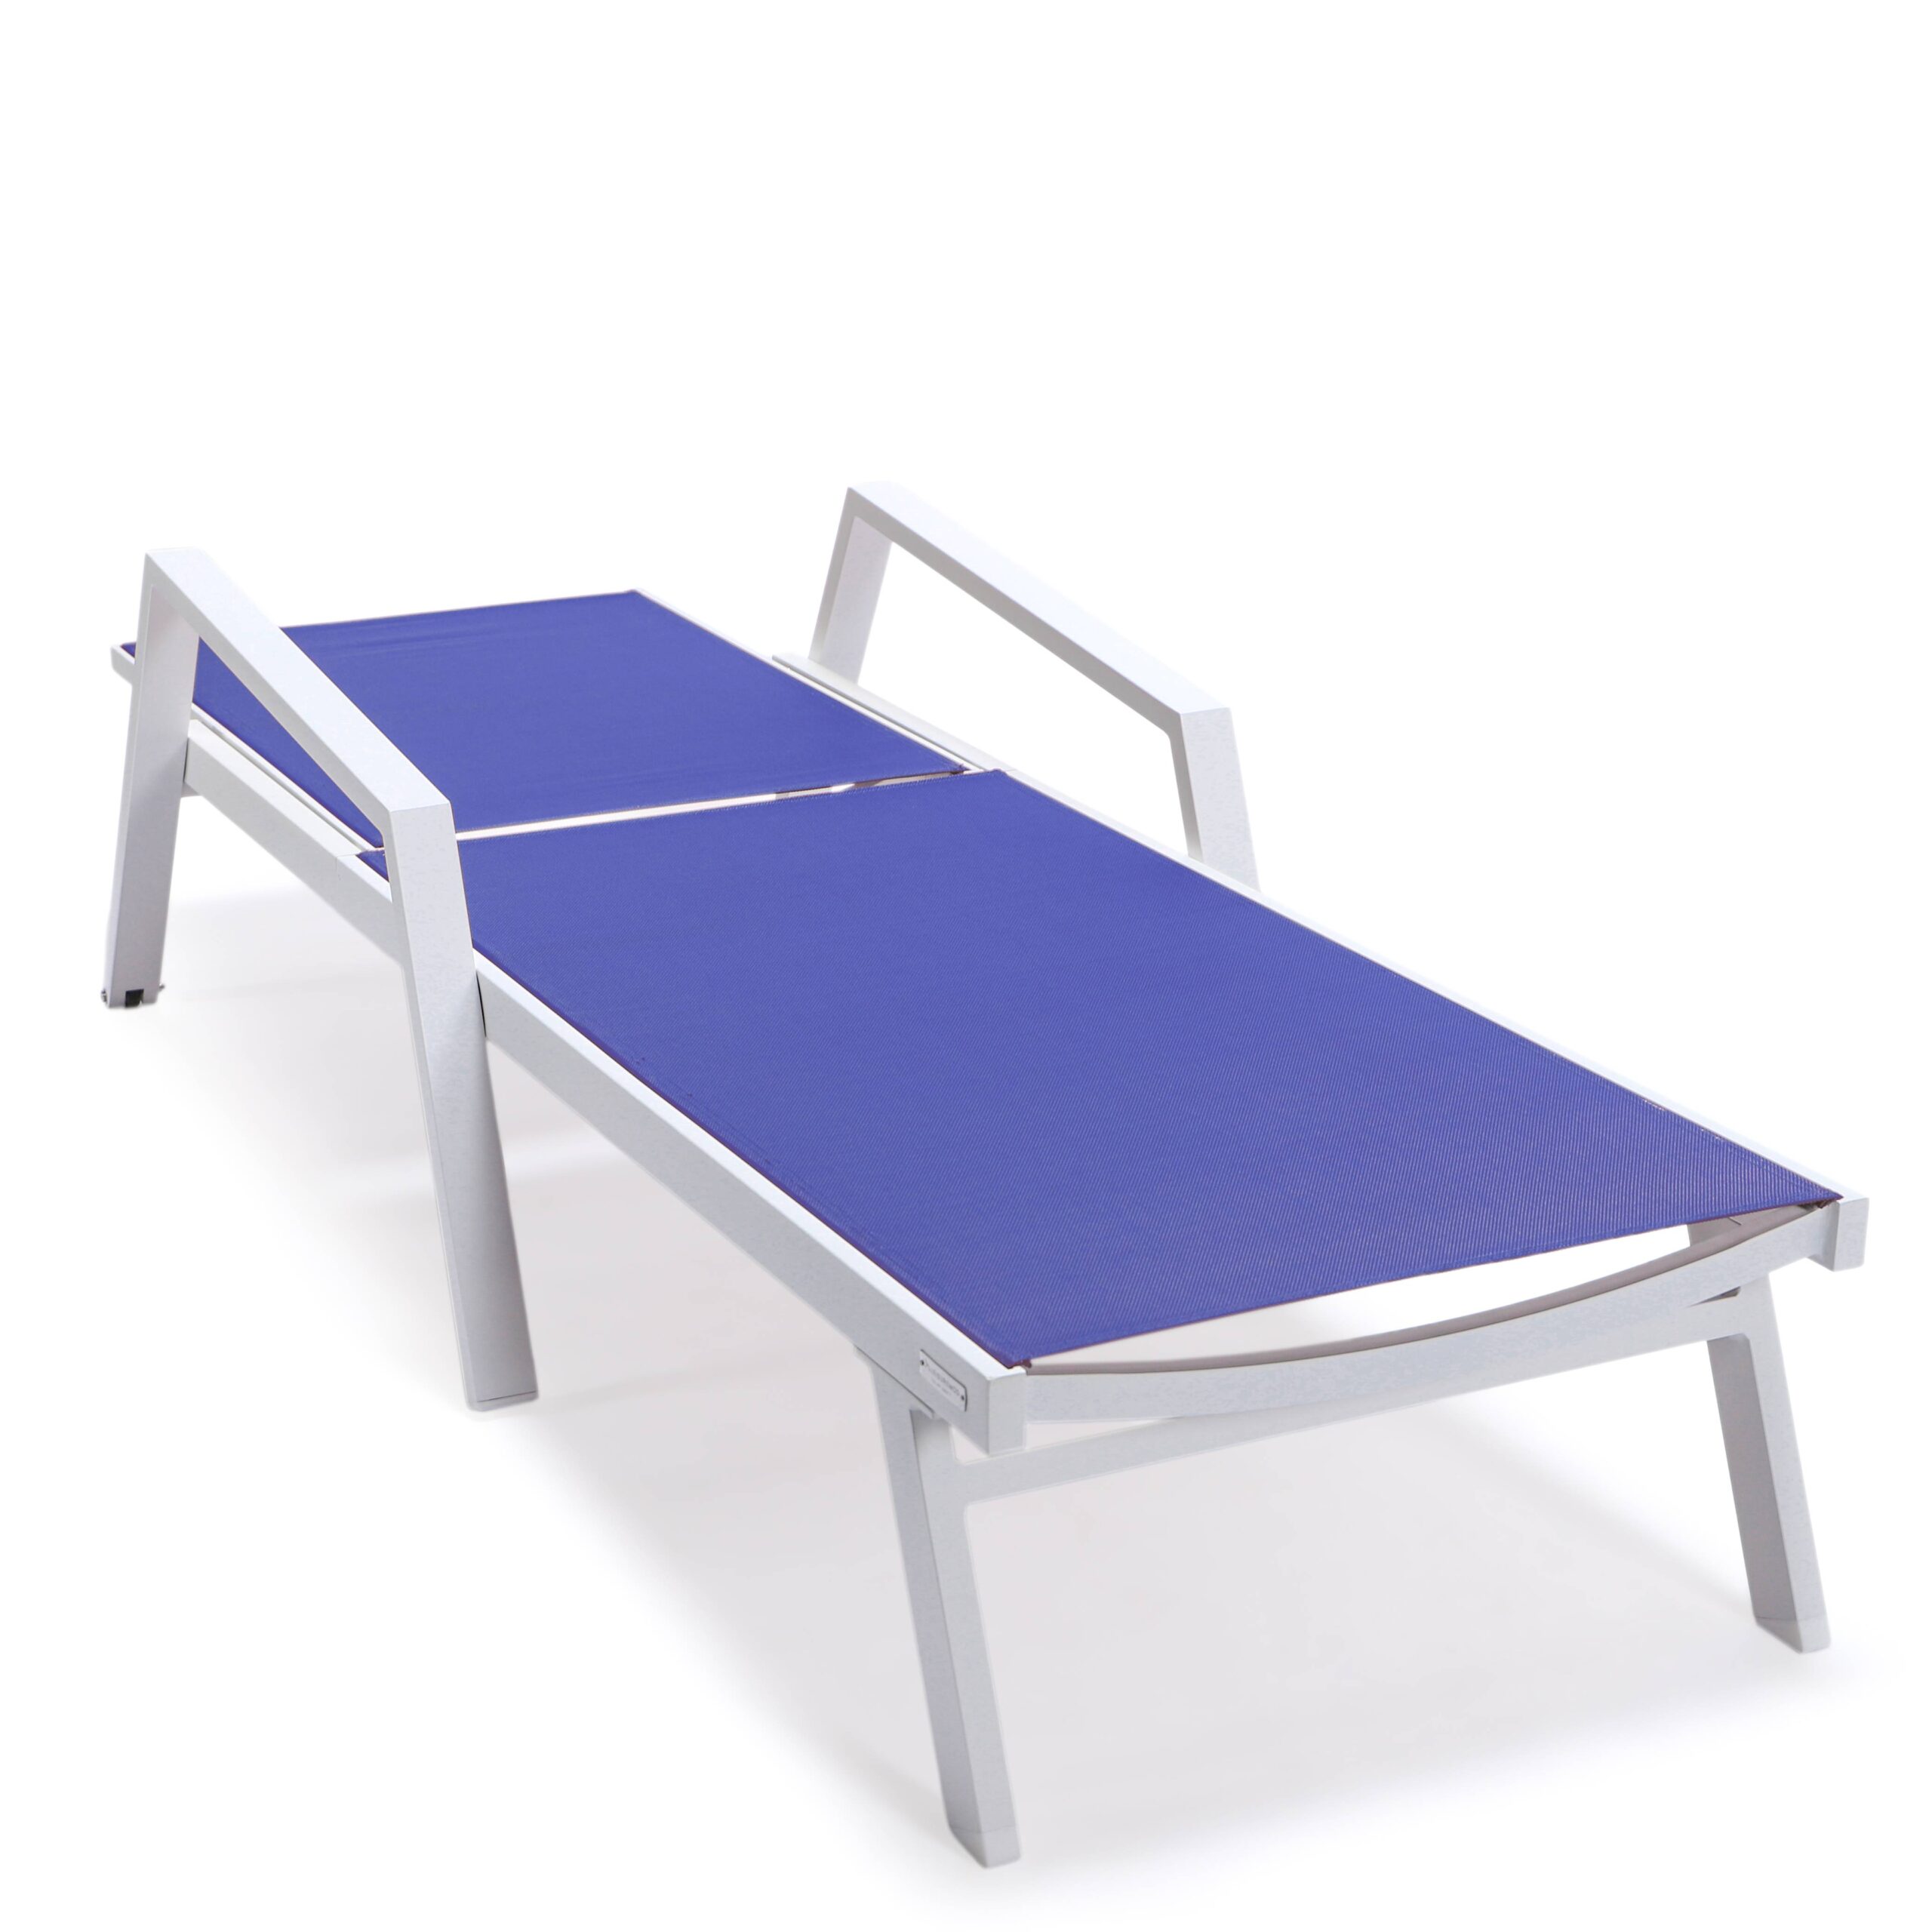 LeisureMod Marlin Patio Chaise Lounge Chair with Armrests Poolside Outdoor Chaise Lounge Chair for Patio Lawn & Garden Modern White Aluminum Suntan Chair with Sling Chaise Lounge Chair (Navy Blue) - image 3 of 12